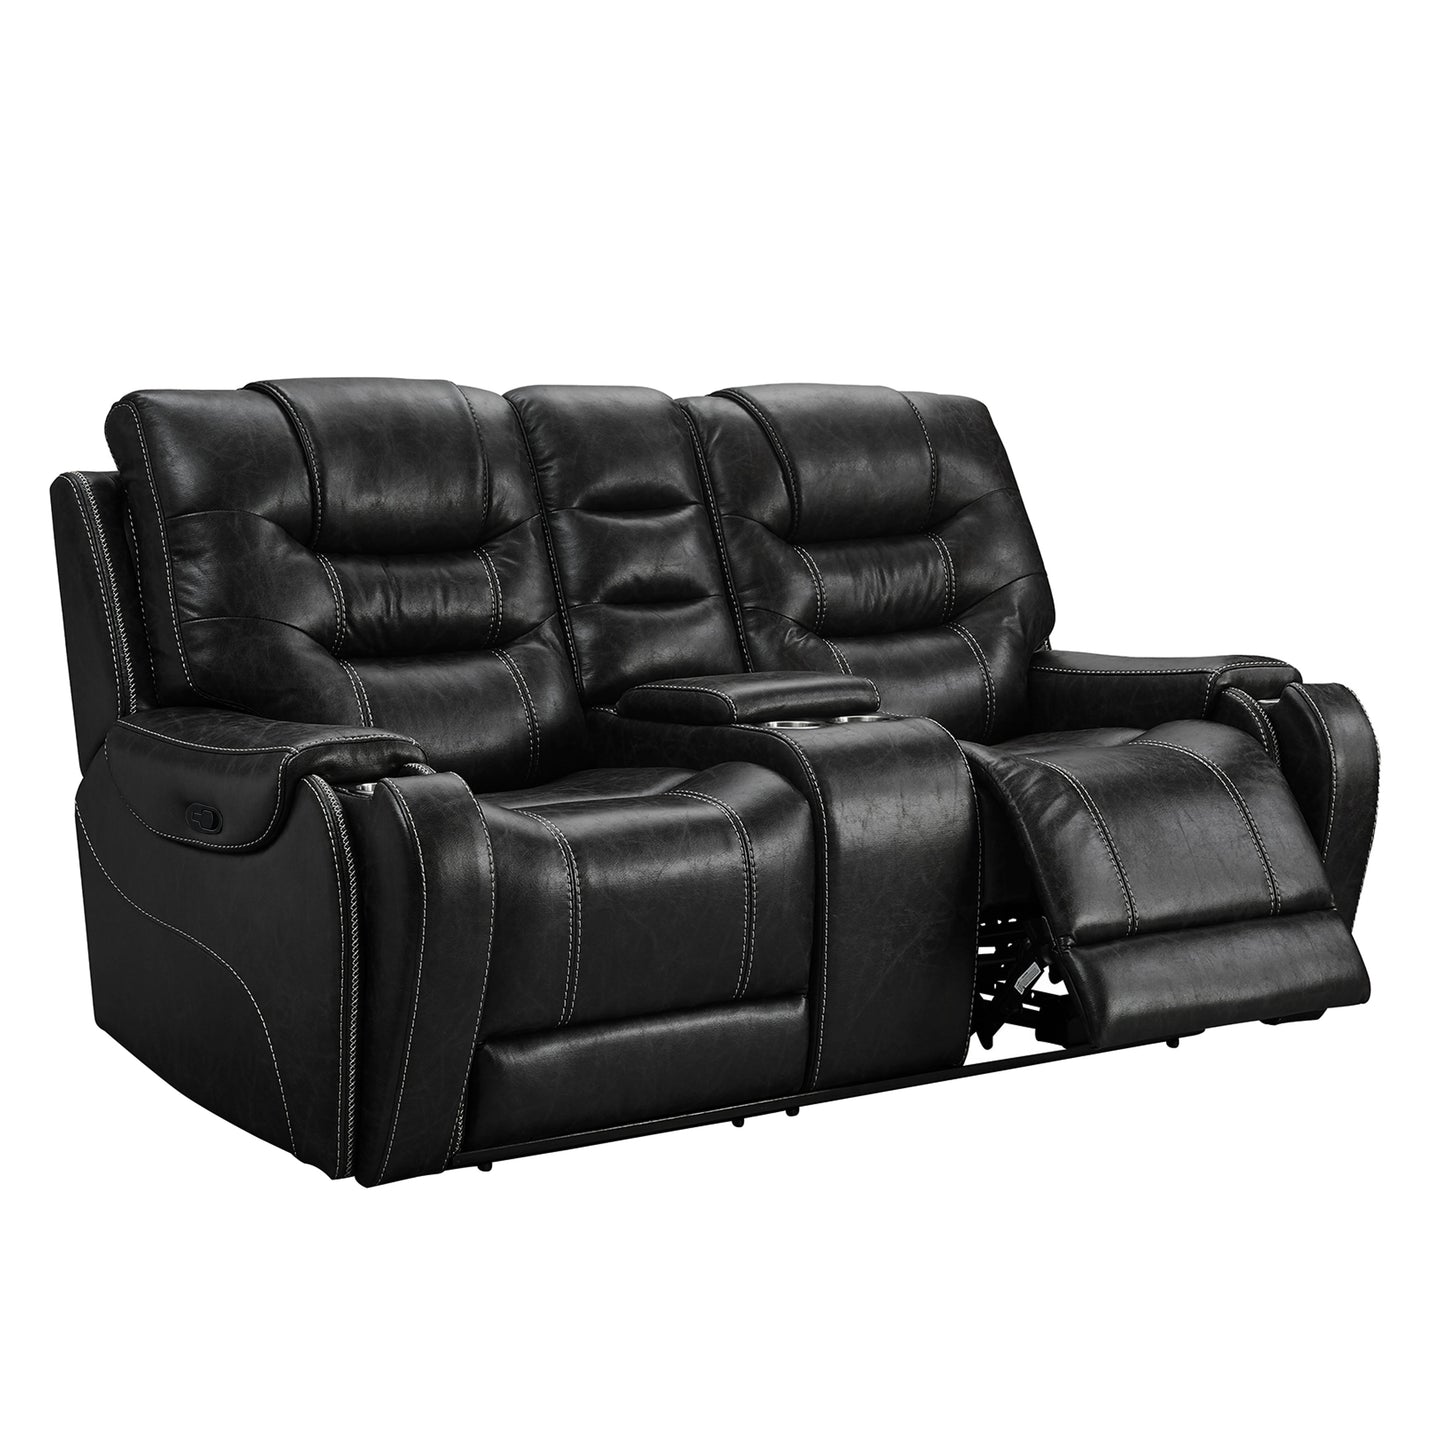 Rowena Contemporary Faux Leather Reclining Loveseat with Console, Smoke